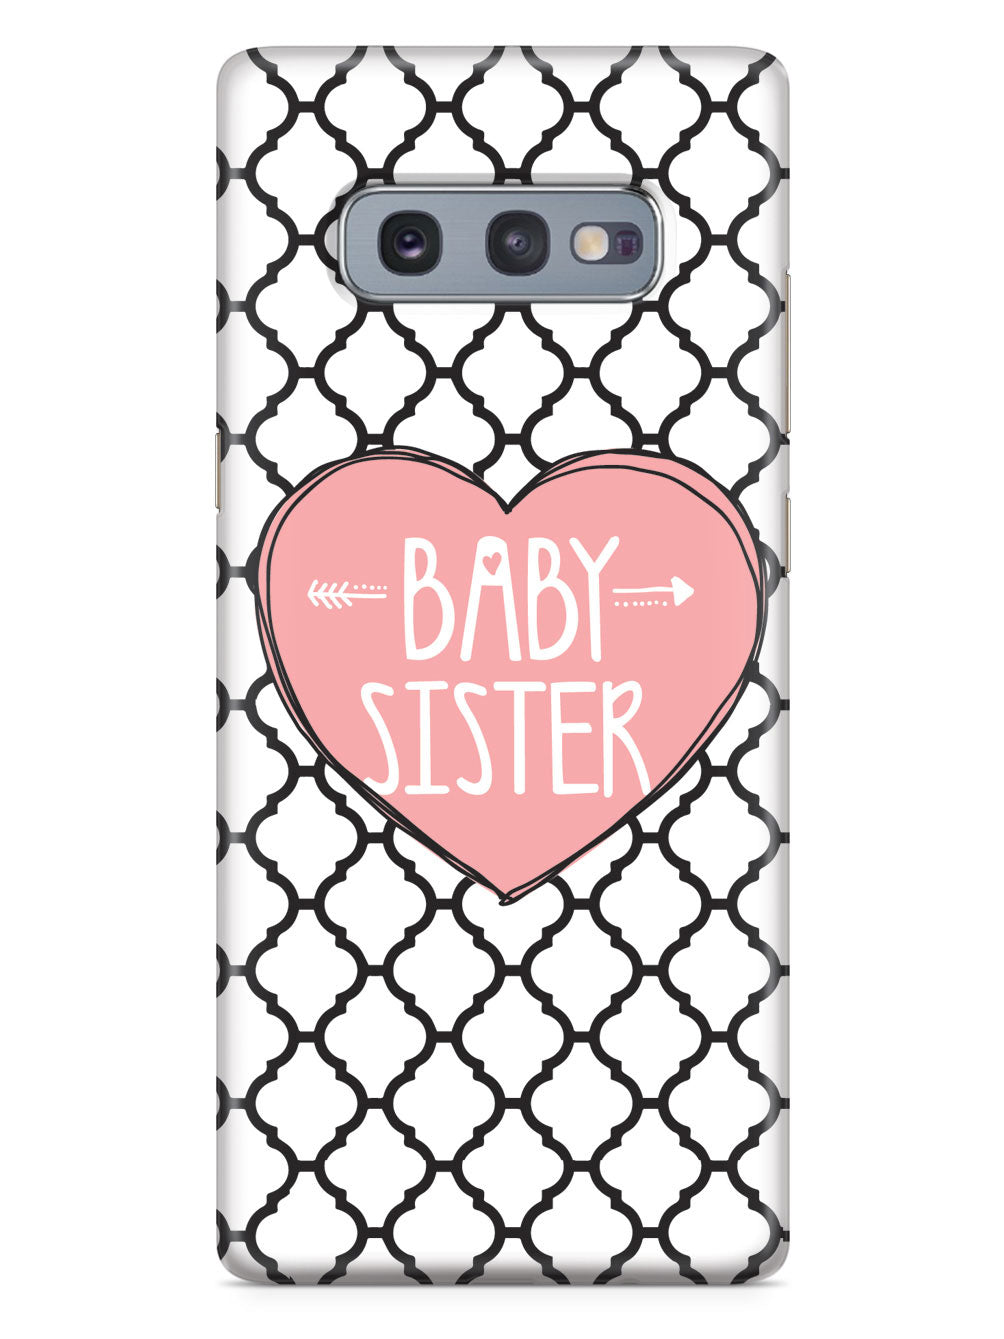 Sisterly Love - Baby Sister - Moroccan Pattern Case